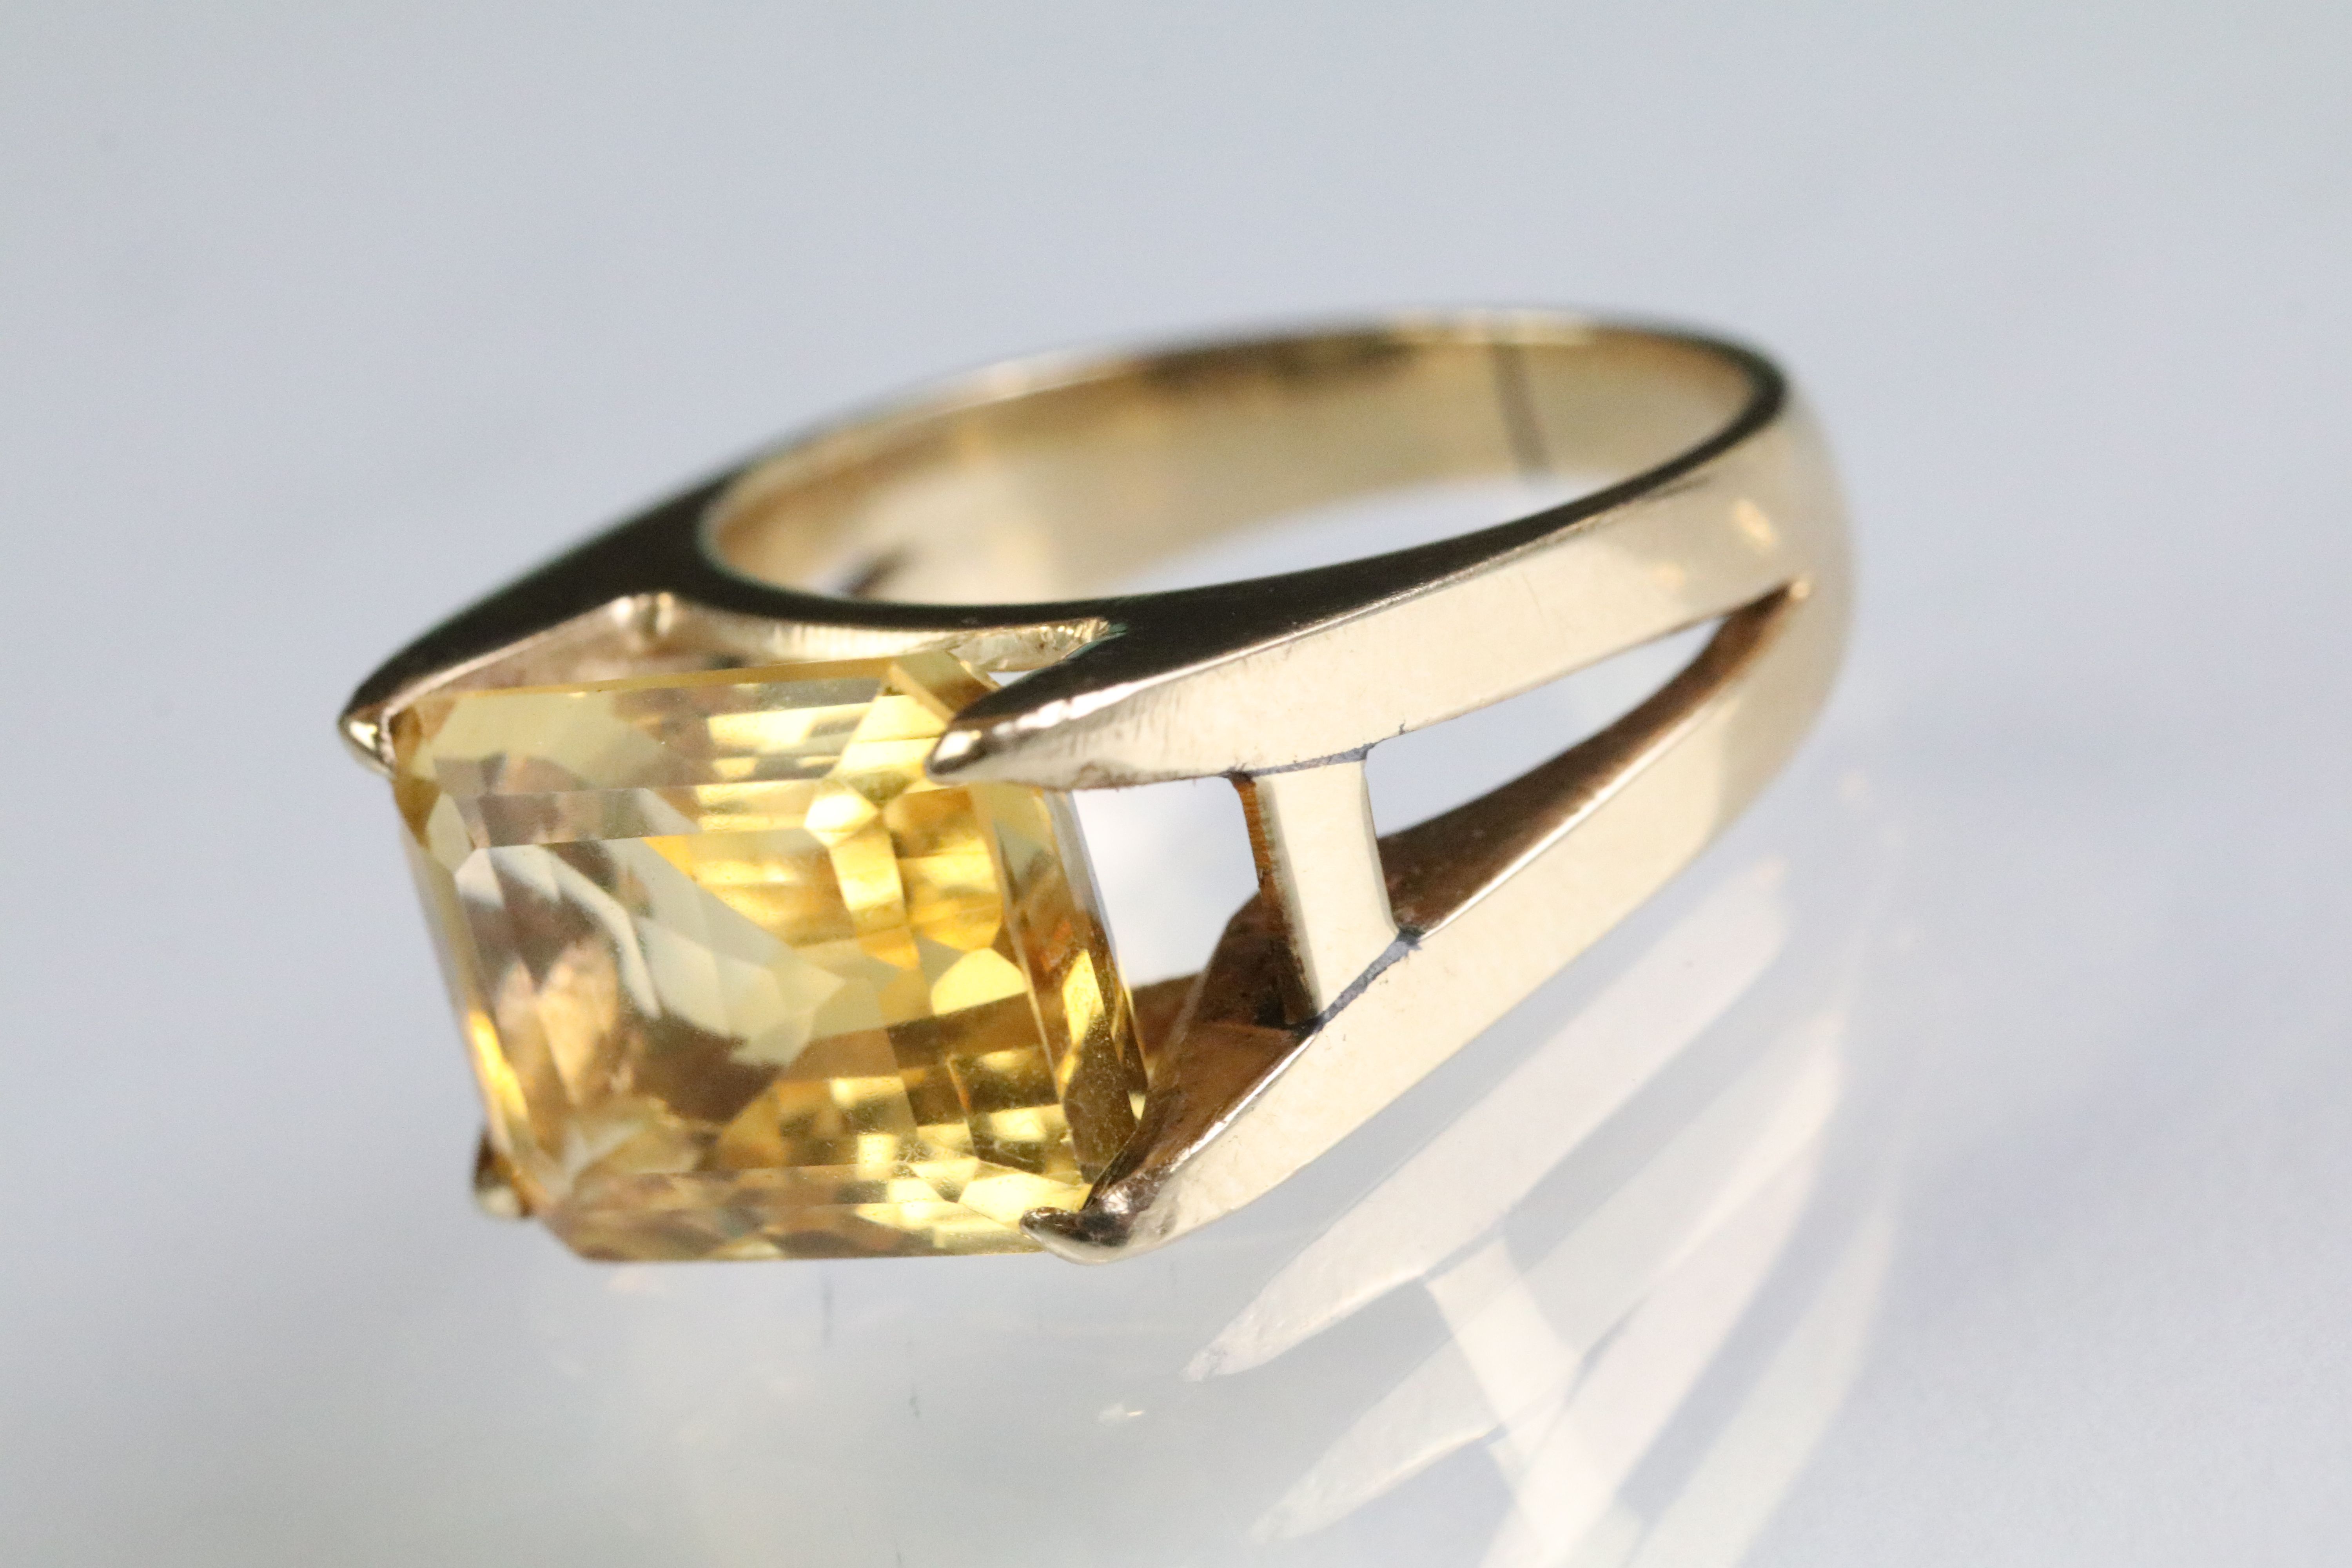 Vintage citrine solitaire ring being set with a step cut citrine in an open four claw setting.